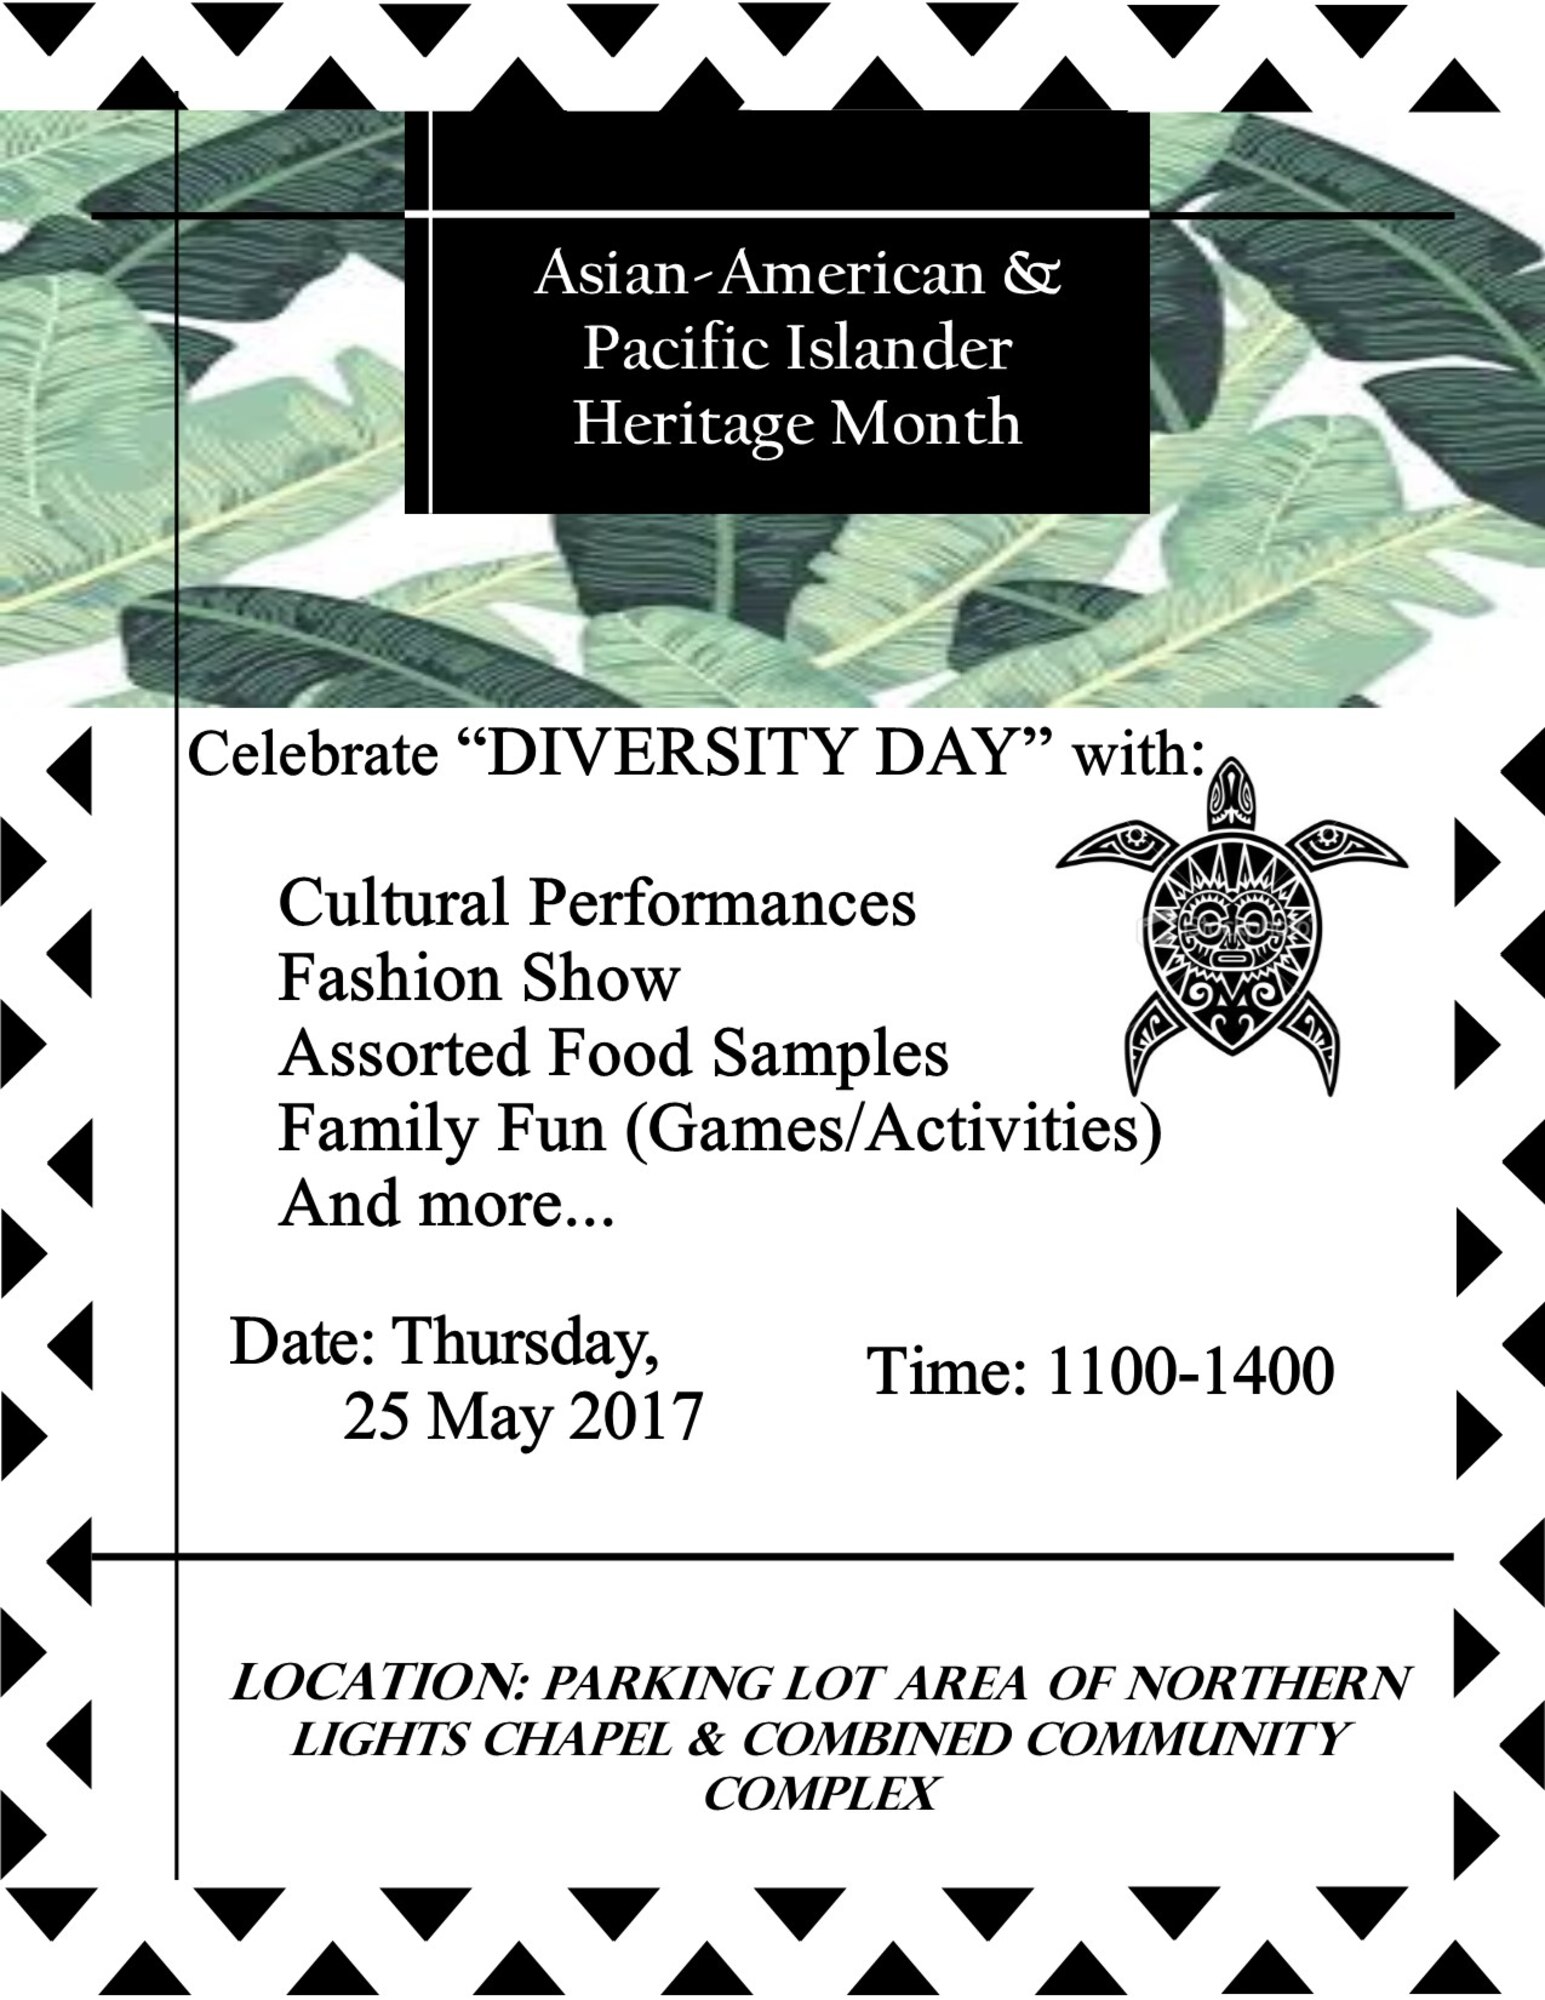 Diversity Day is scheduled to occur at the Combined Community Complex parking lot on Minot Air Force Base, N.D., May 25, 2017, from 11 a.m. to 2 p.m. During the event, there will be food sampling, performances, a fashion show and kids activities. (Courtesy photo)